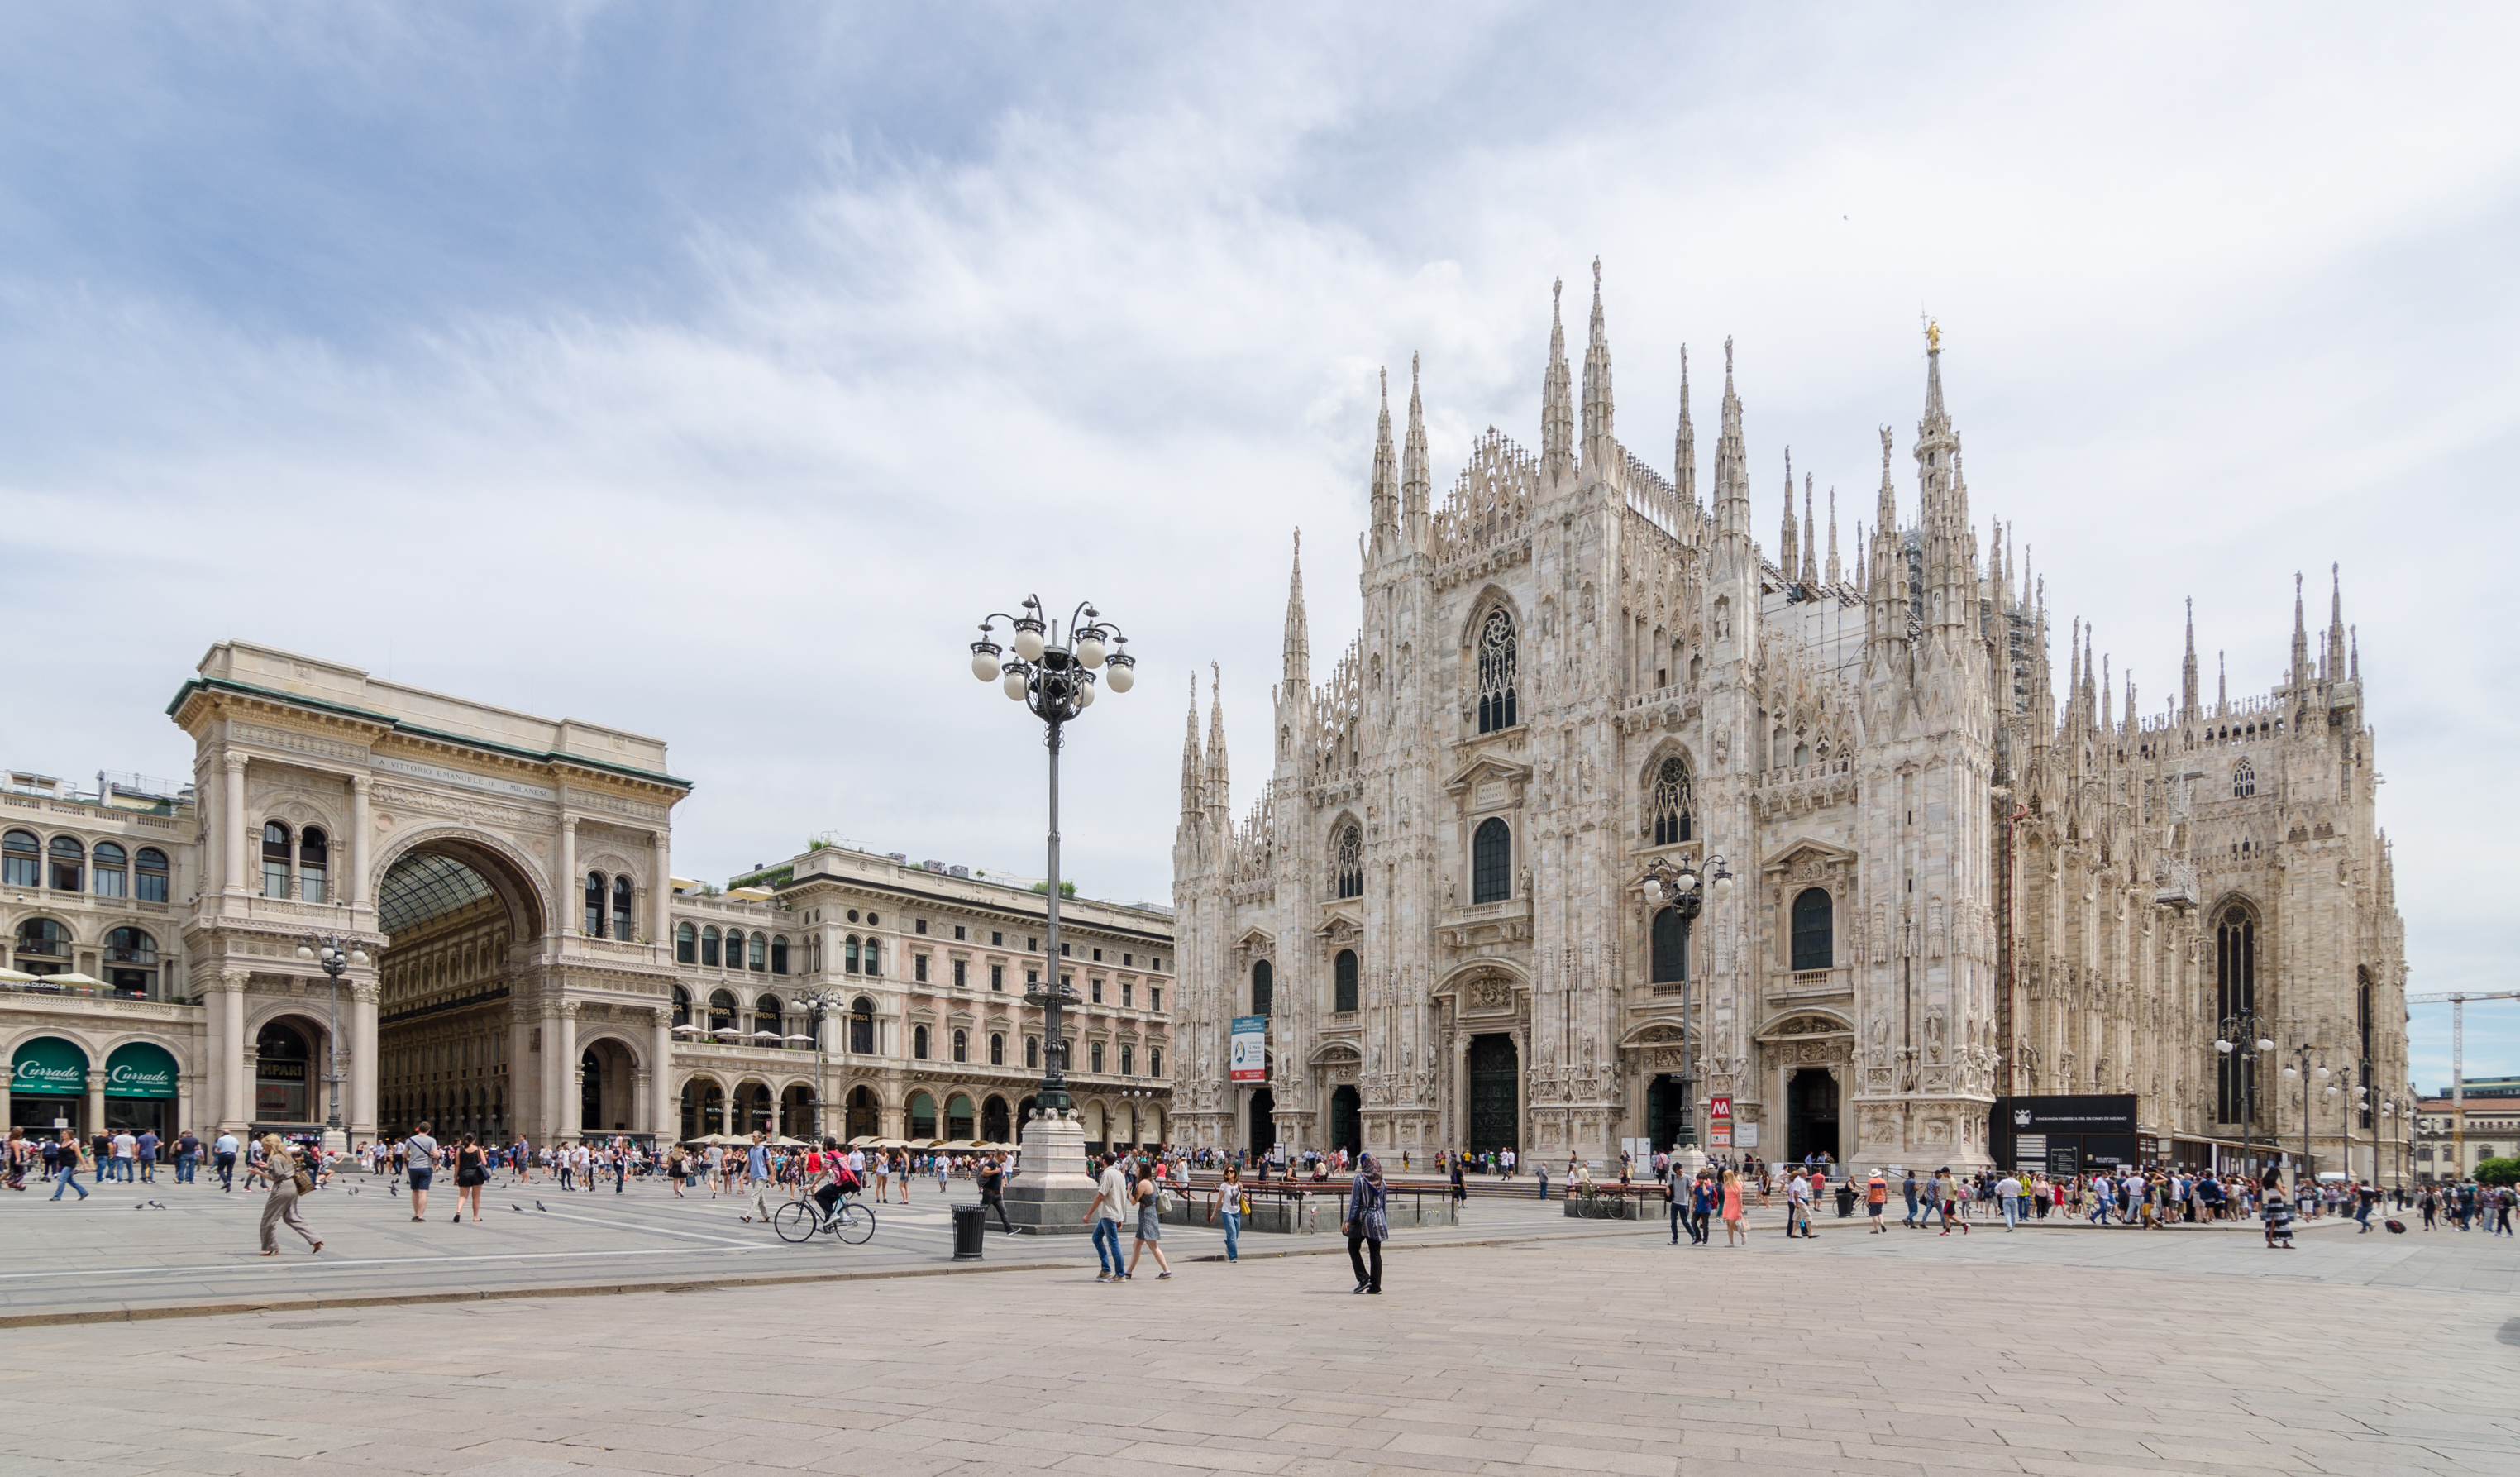 Milano, Duomo with Milan Cathedral and Galleria Vittorio Emanuele II, 2016